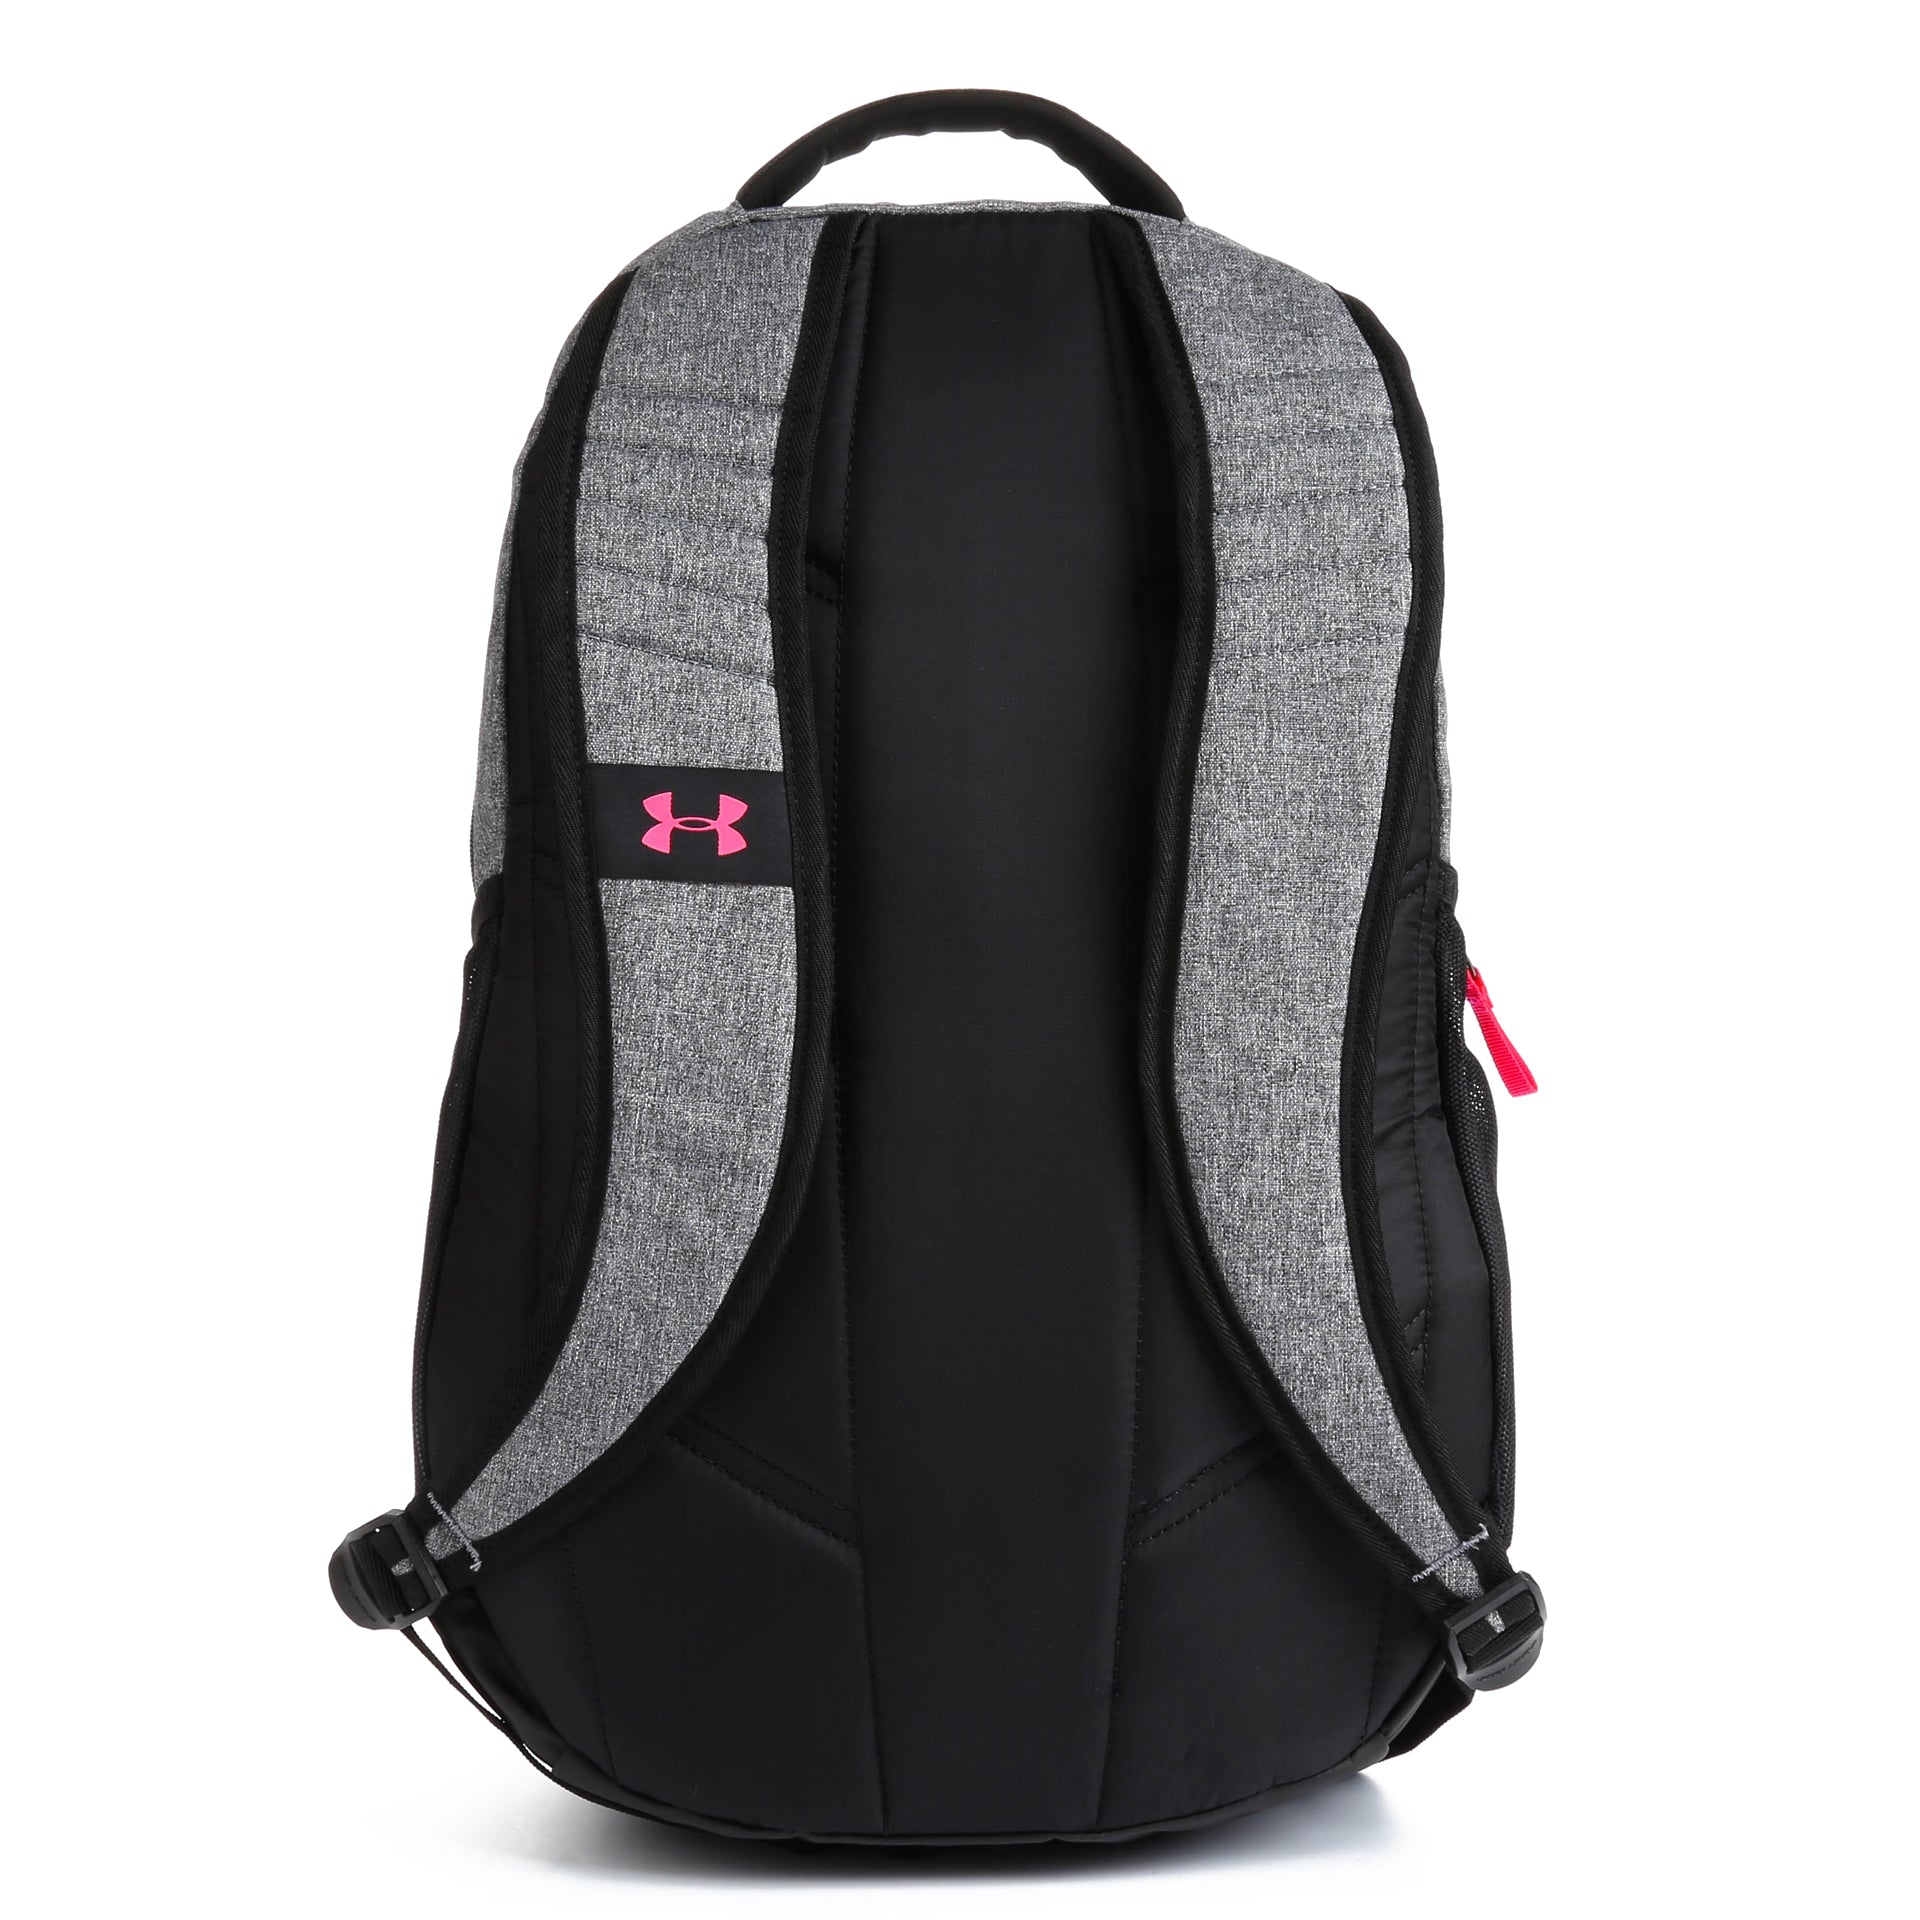 under armour backpack grey